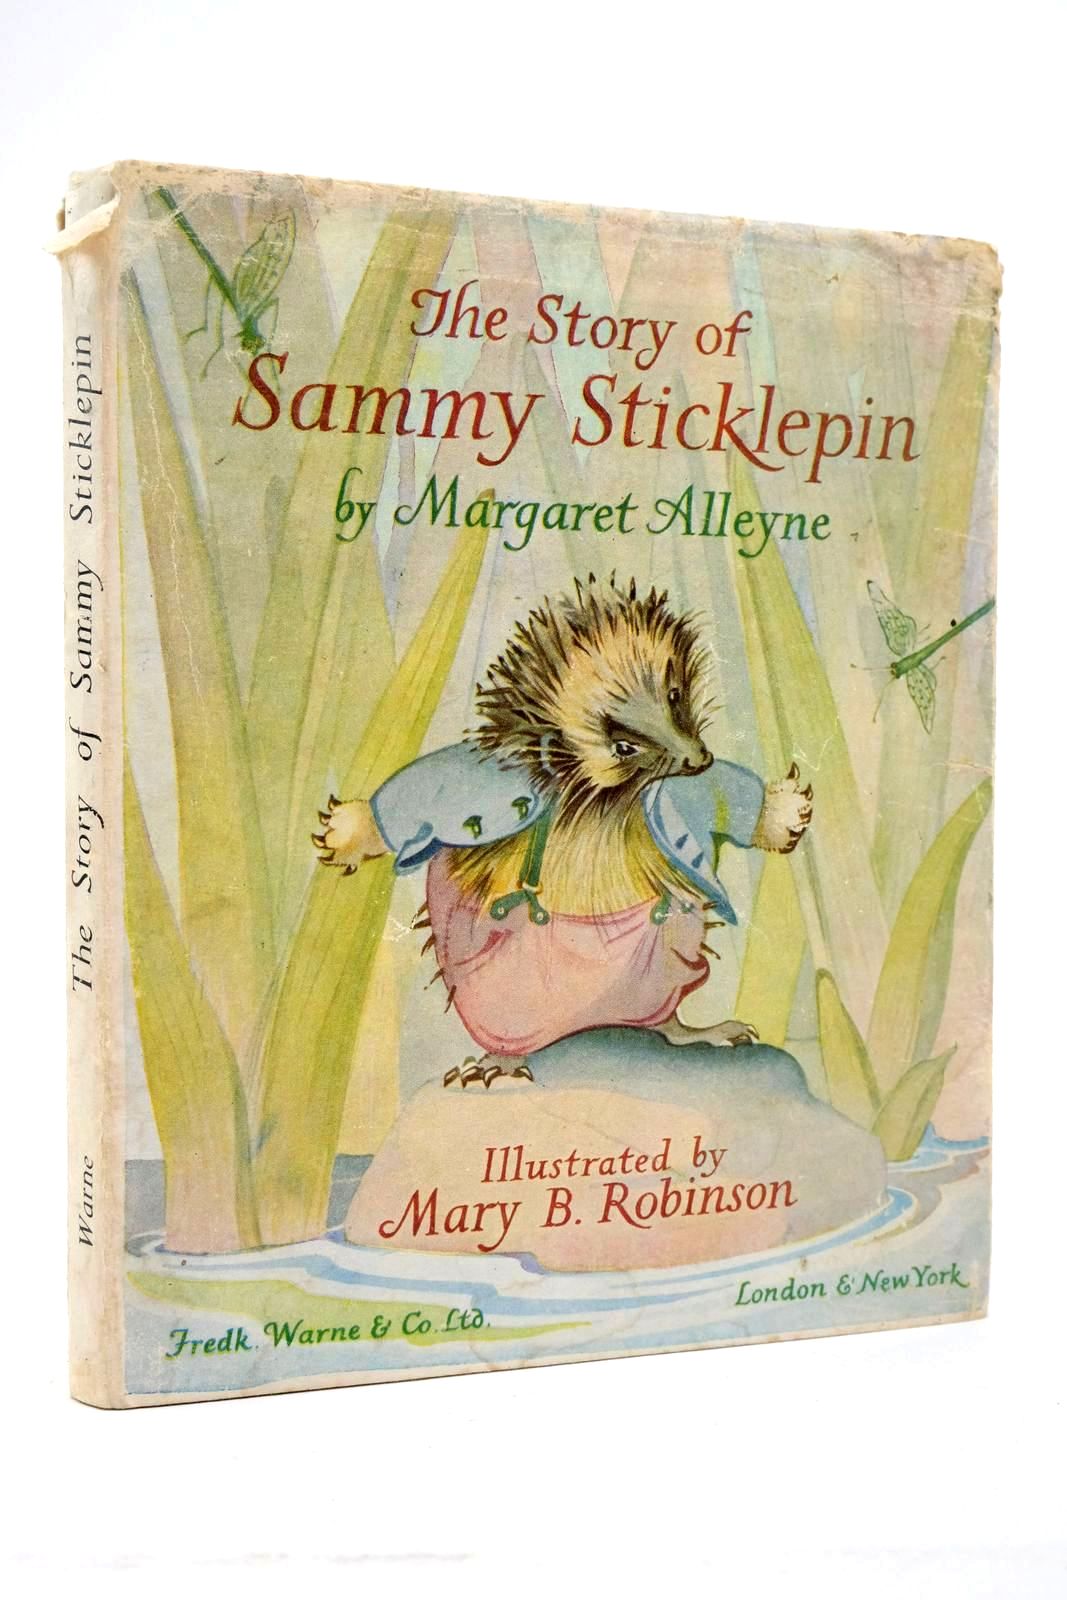 Photo of THE STORY OF SAMMY STICKLEPIN written by Alleyne, Margaret illustrated by Robinson, Mary published by Frederick Warne & Co Ltd. (STOCK CODE: 2135485)  for sale by Stella & Rose's Books